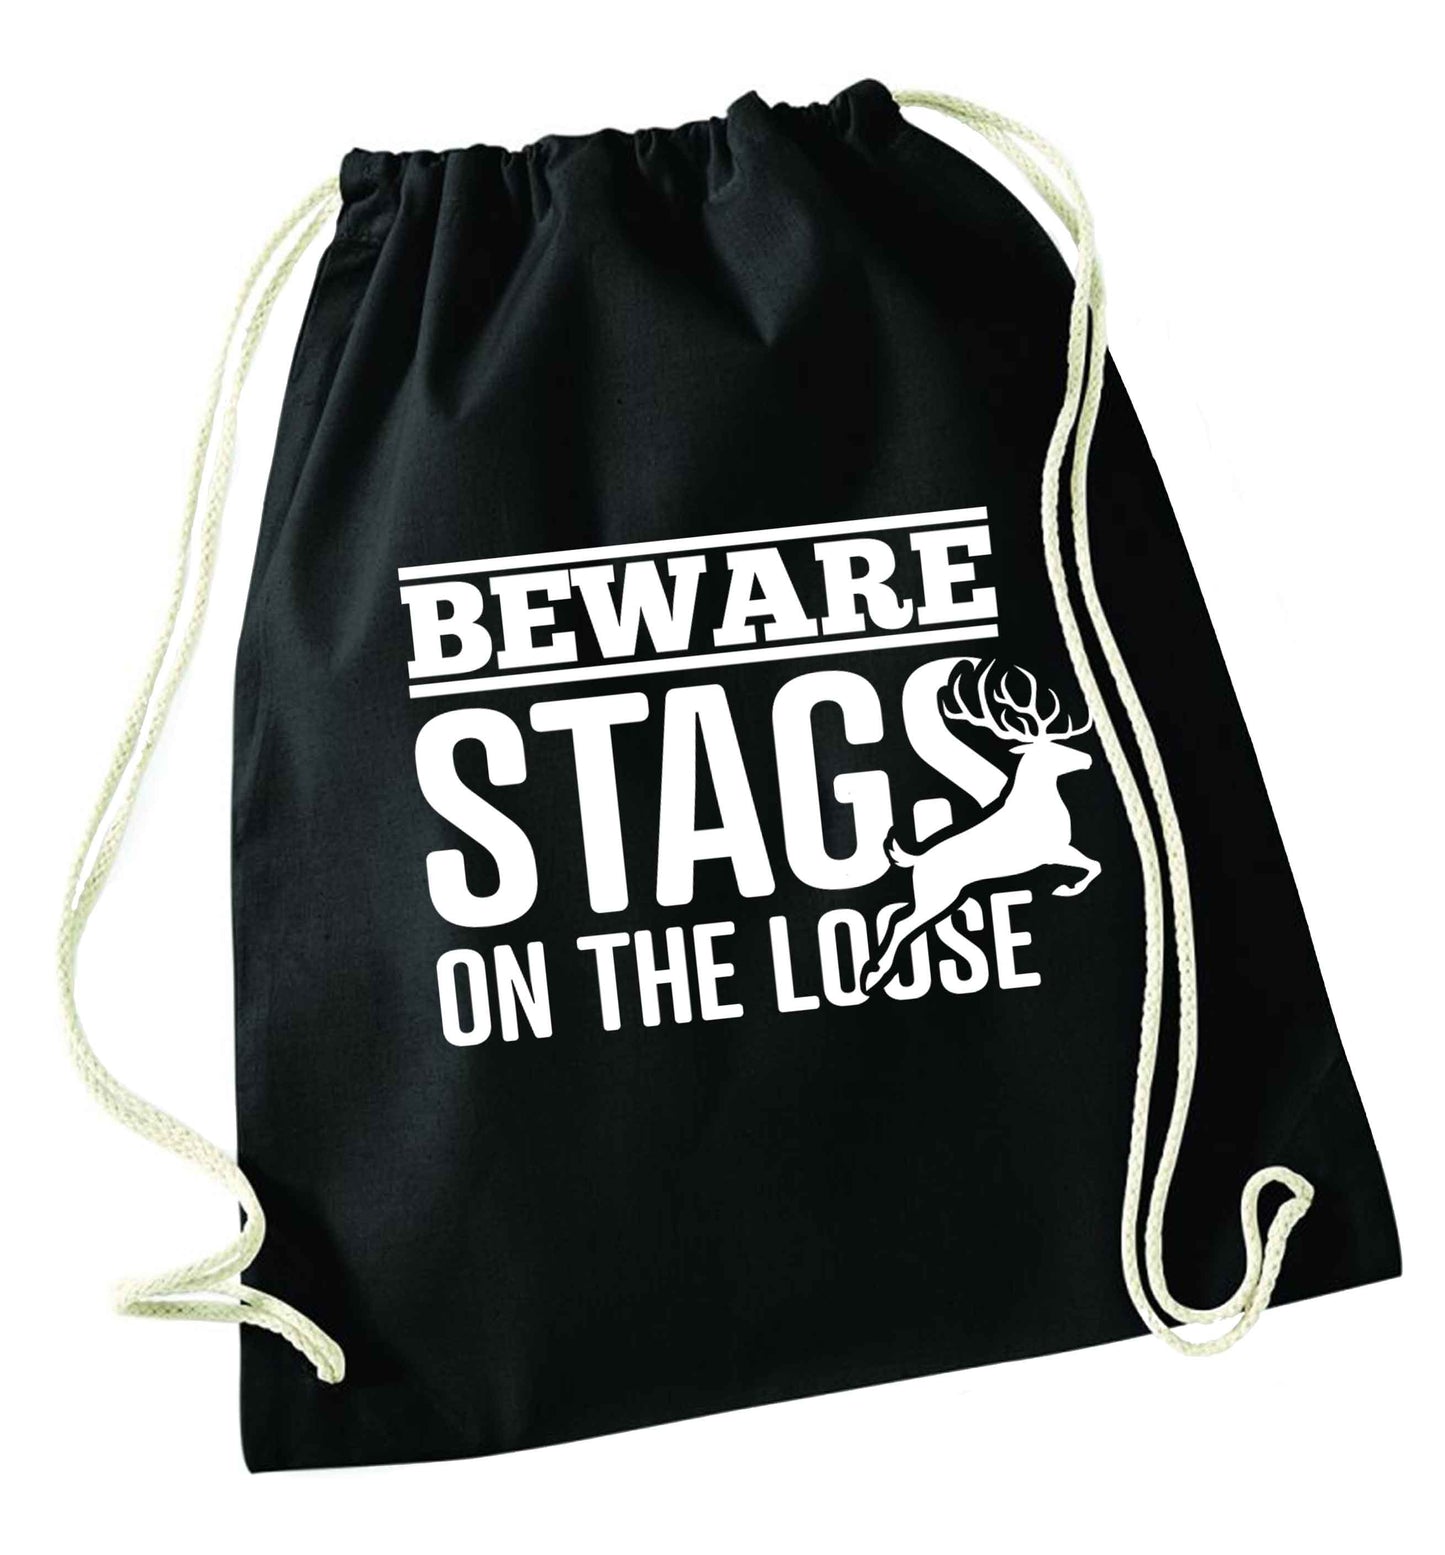 Beware stags on the loose black drawstring bag